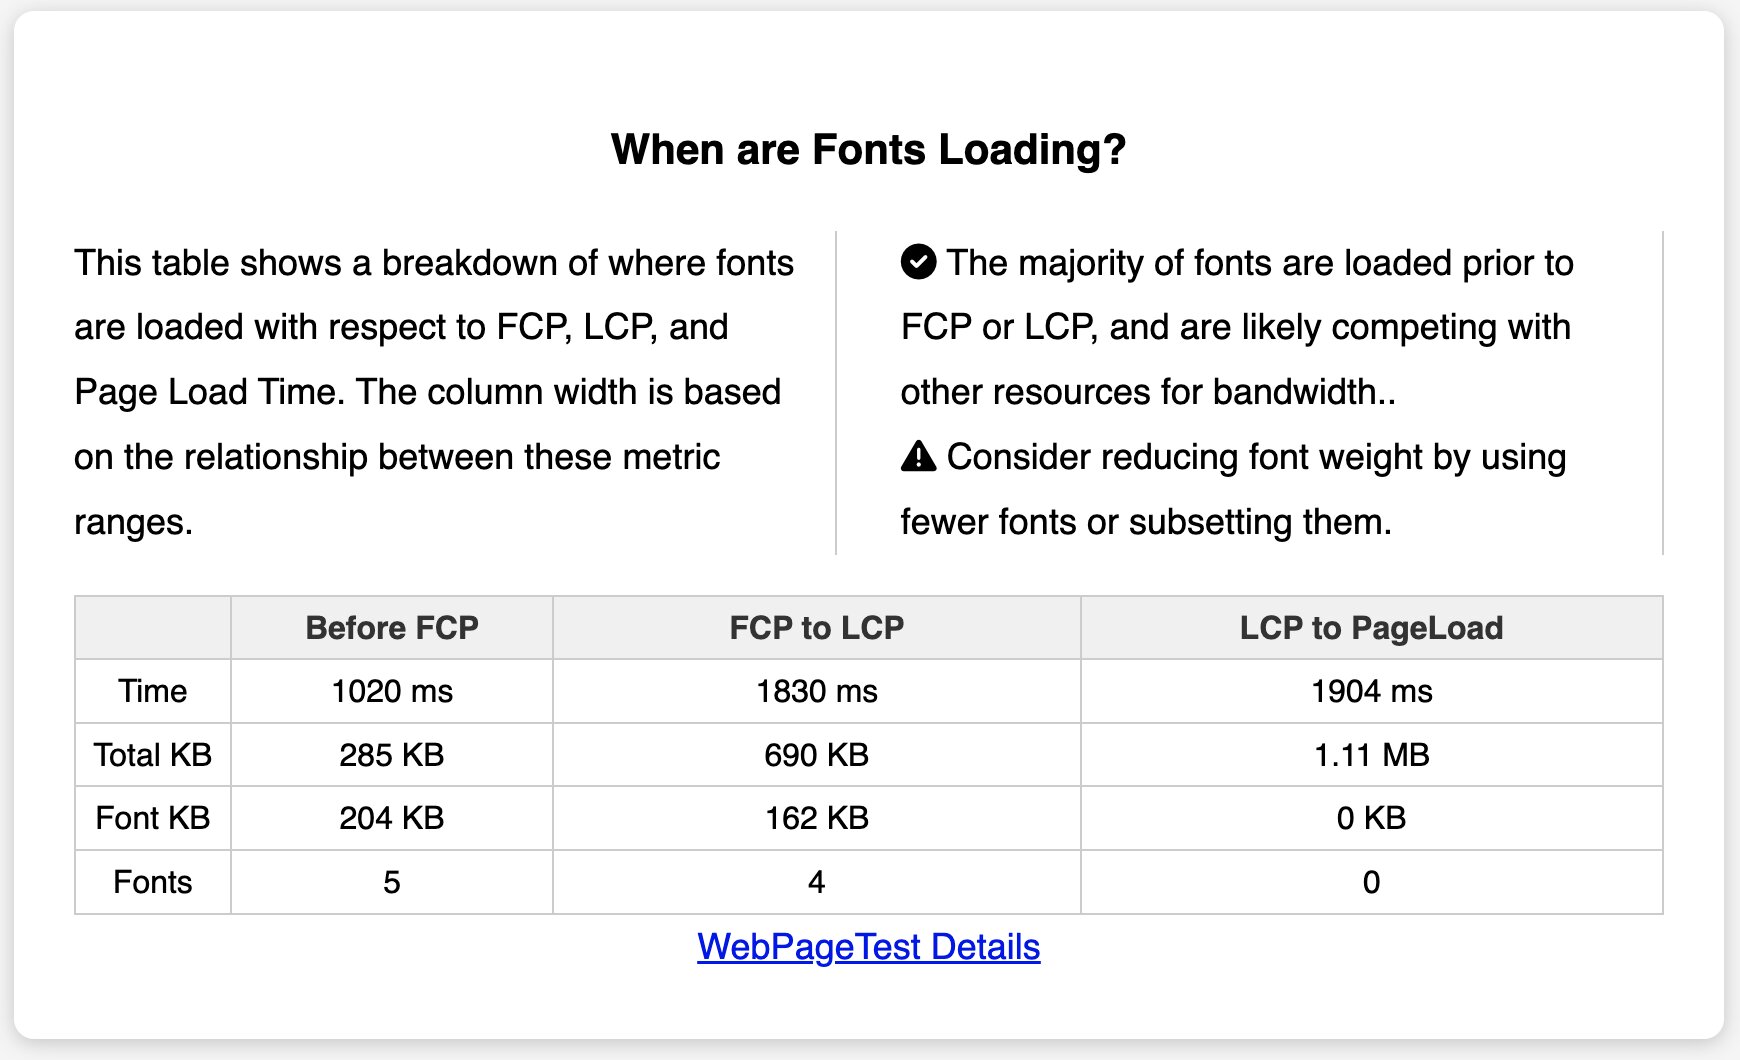 When are Fonts Loading - Mayoclinic